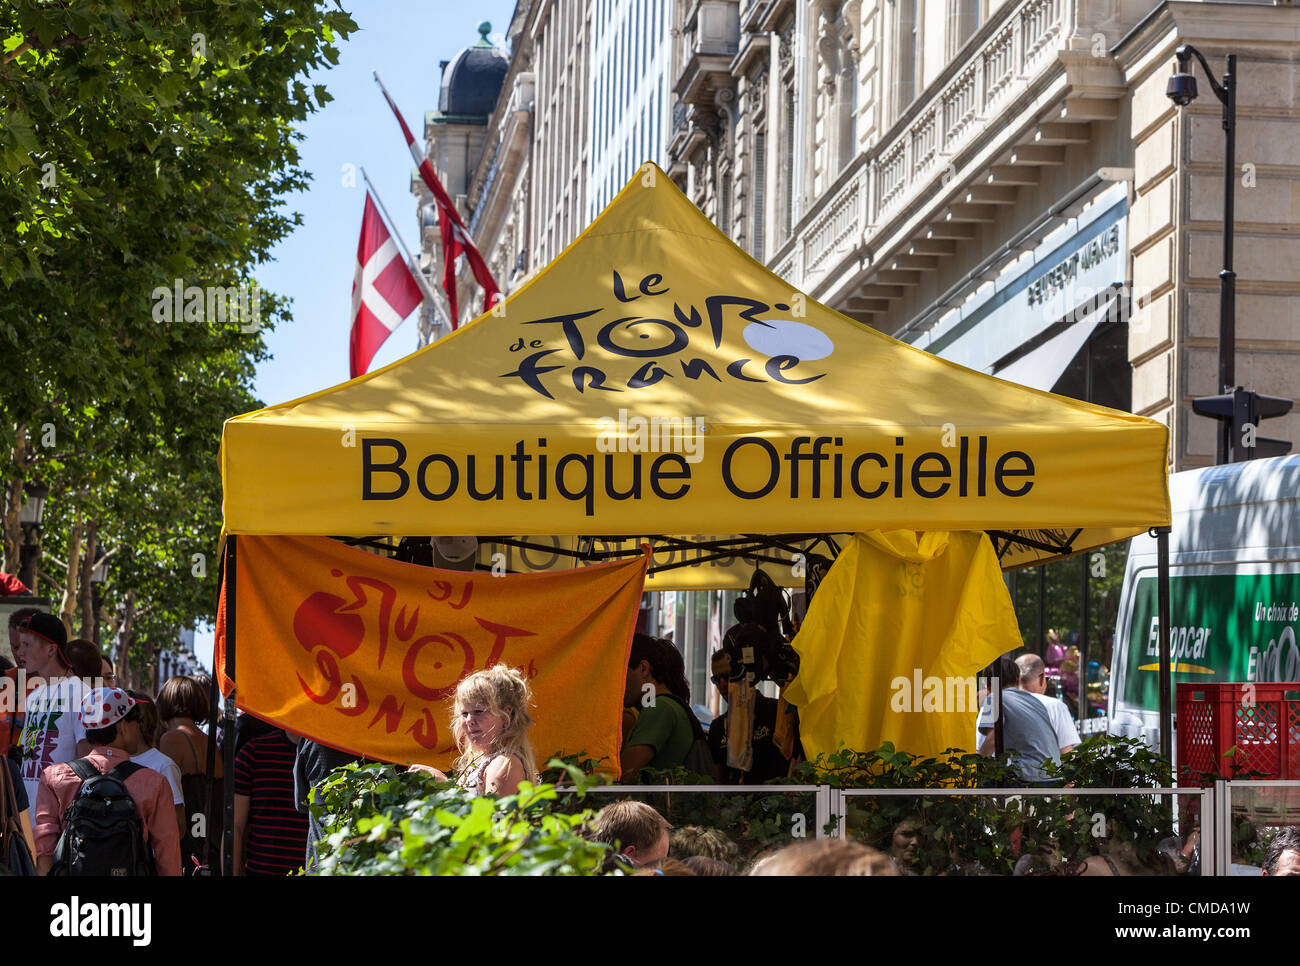 Paris,France,July 22 2012: Image of the 'Boutique Officielle' full with specific souvenirs of Le Tour de France on the Champs Elysees Boulevard during the last stage of Tour of France 2012 in Paris,France. Stock Photo